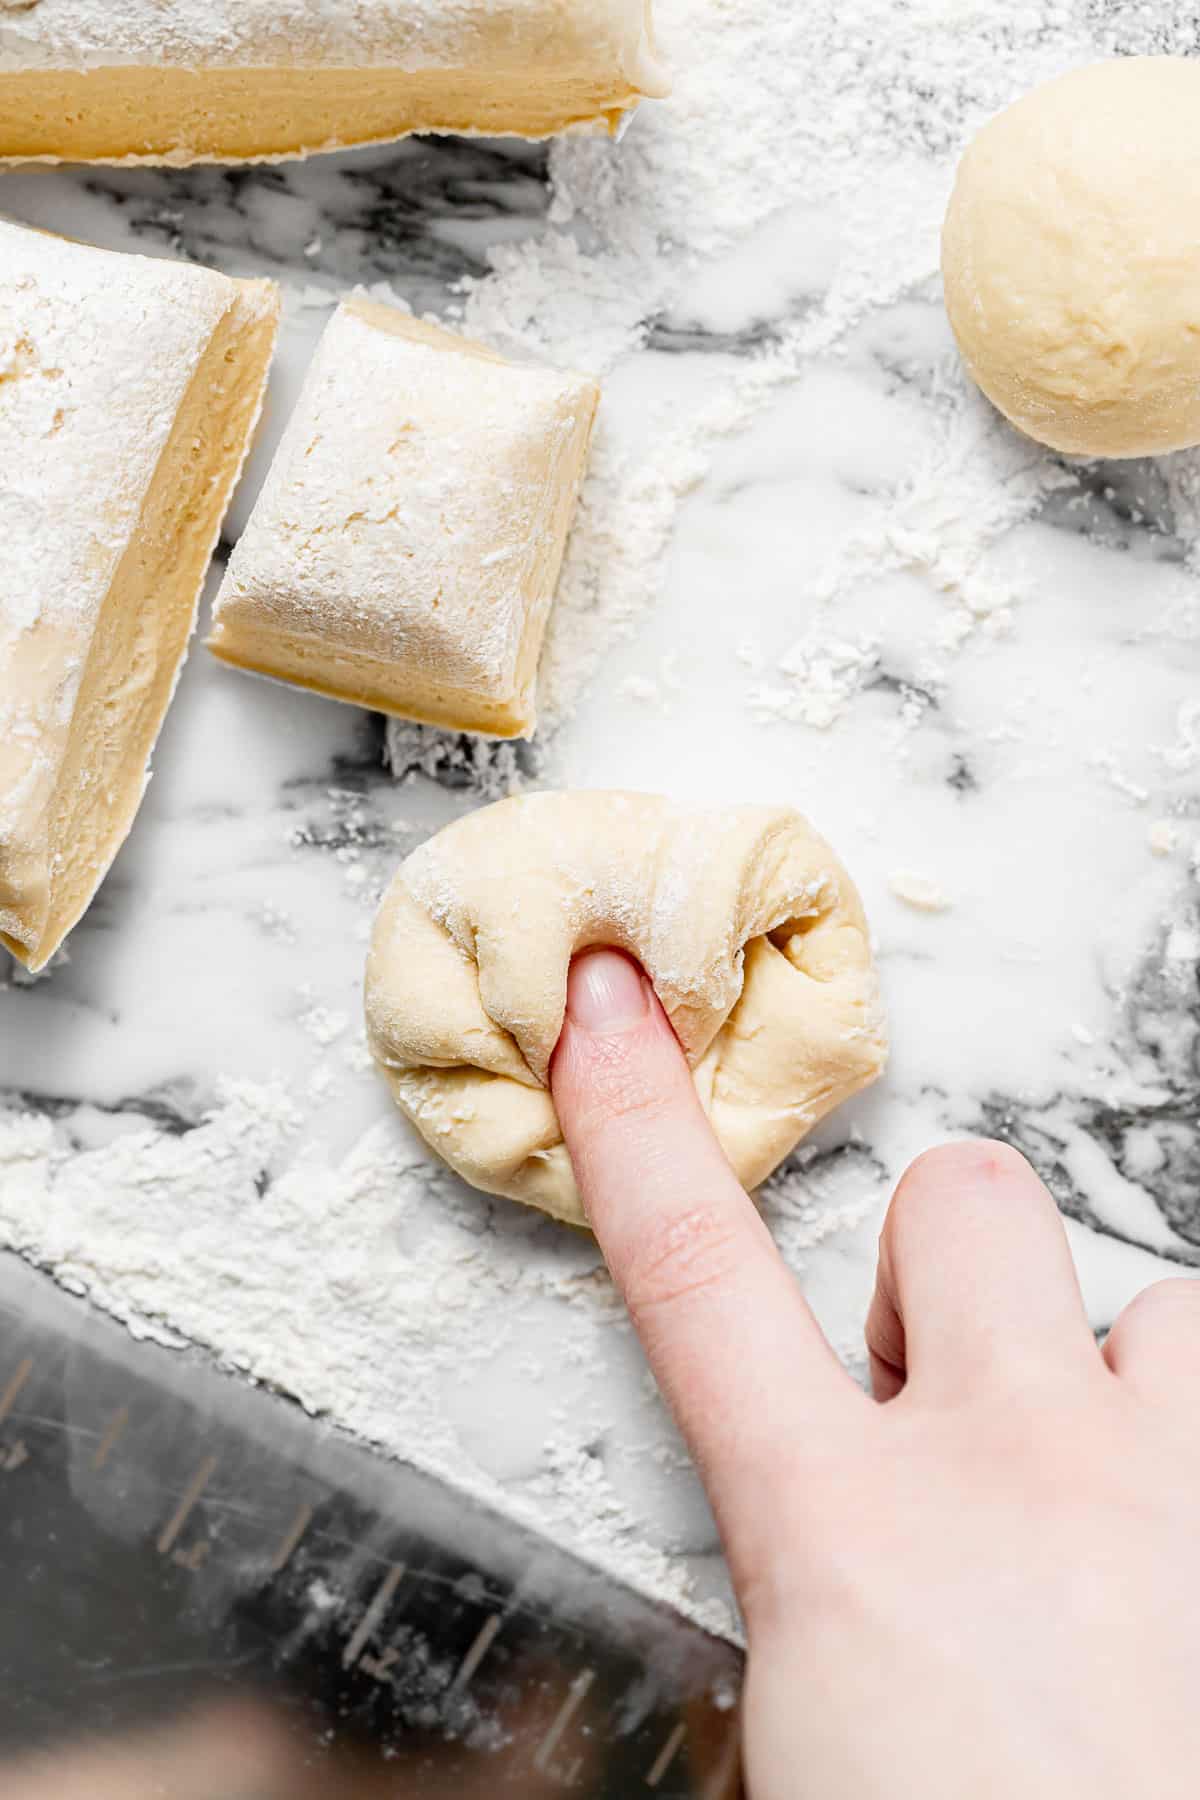 dough being shaped into balls.